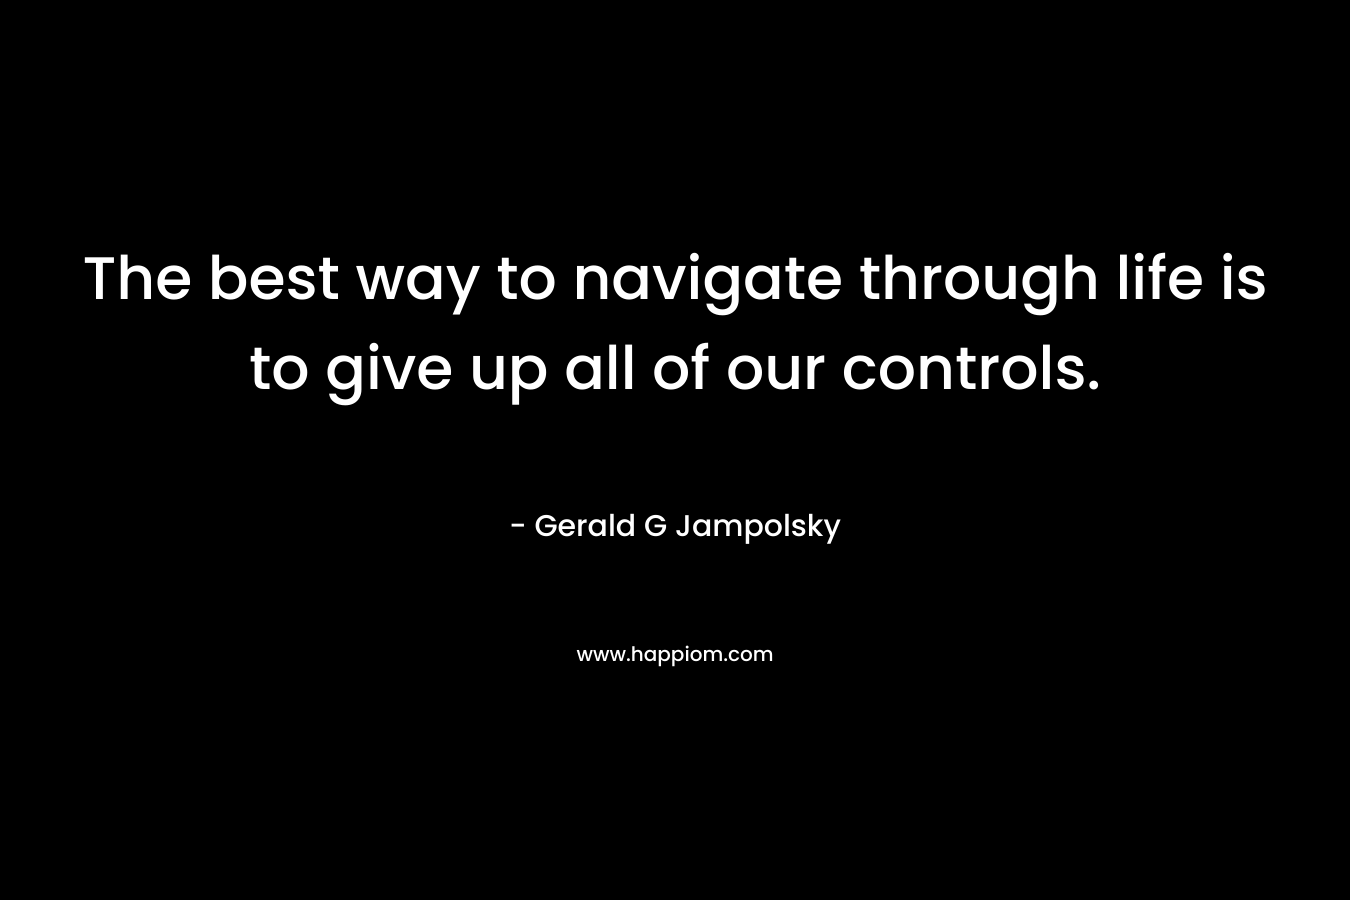 The best way to navigate through life is to give up all of our controls. – Gerald G Jampolsky